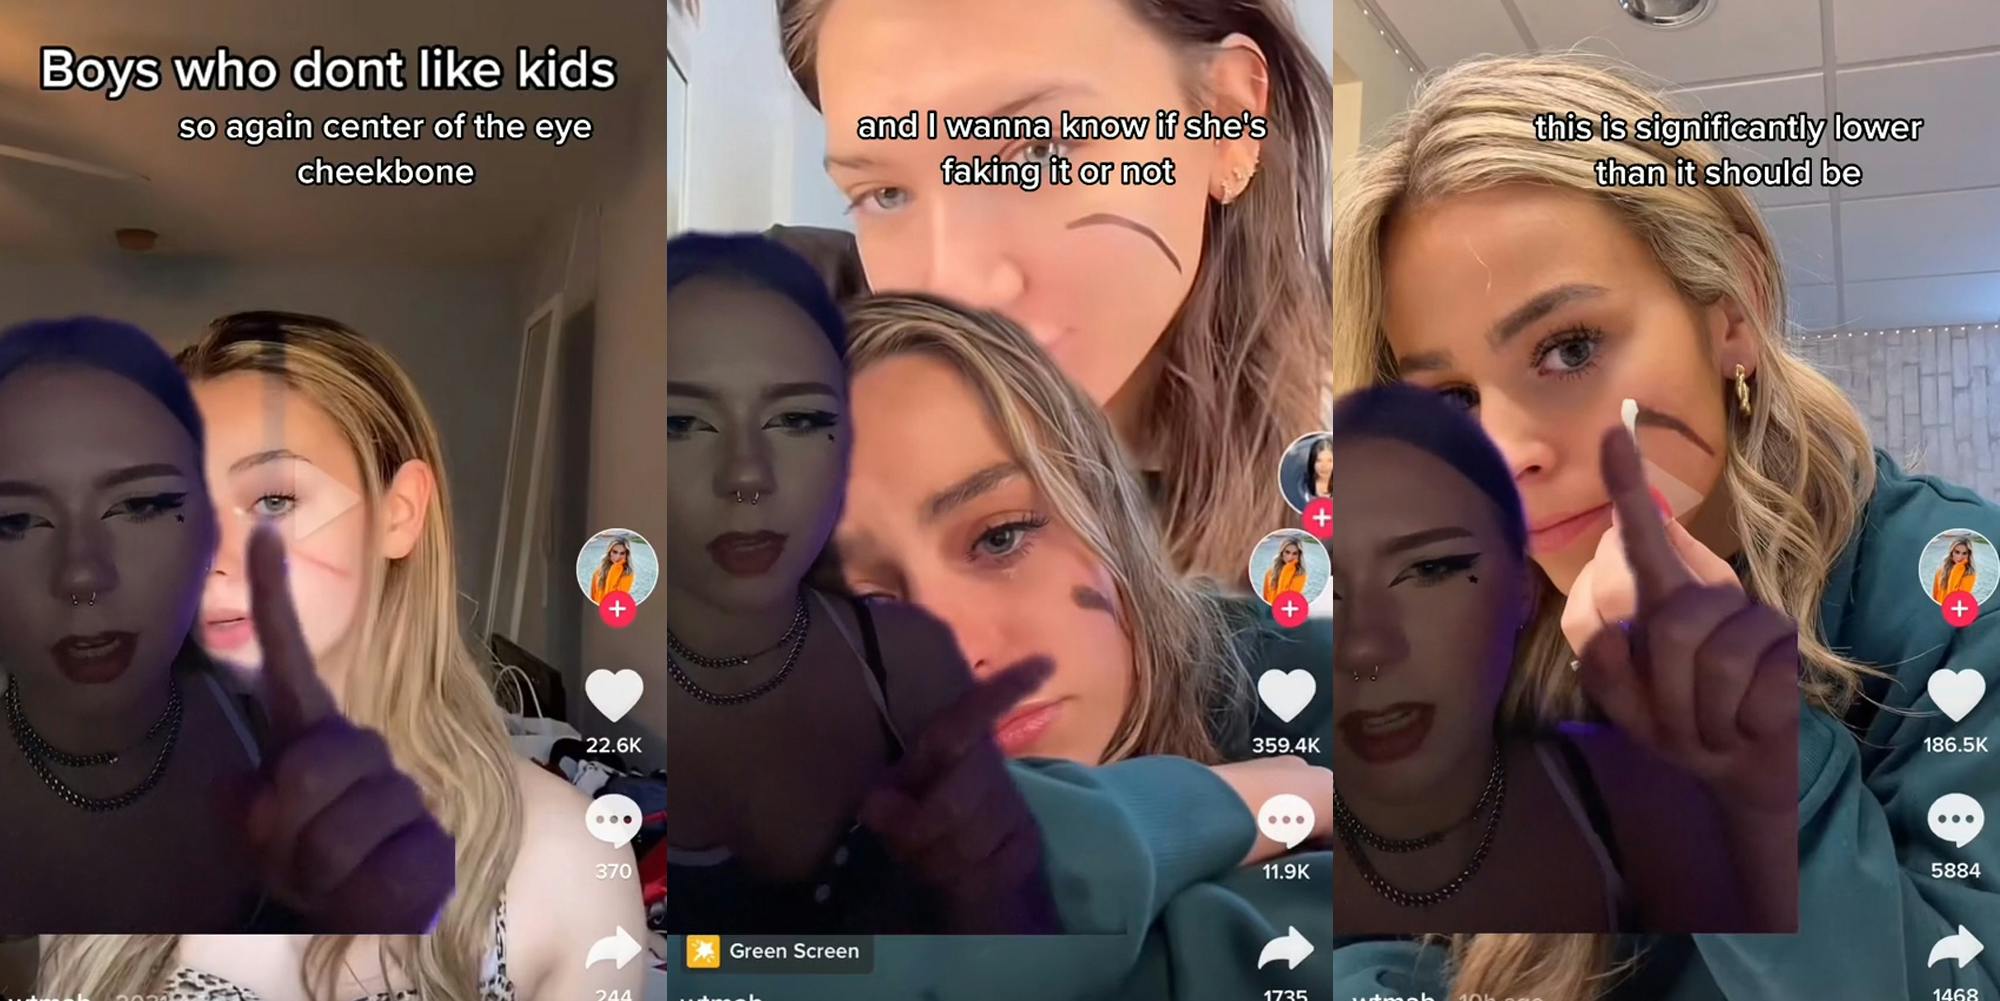 woman greenscreen TikTok over another woman's TikTok with caption "Boys who dont like kids" "so again center of the eye cheekbone" (l) woman greenscreen TikTok over another woman's TikTok with caption "and I wanna know if she's faking it or not" (c) woman greenscreen TikTok over another woman's TikTok with caption "this is significantly lower than it should be" (r)